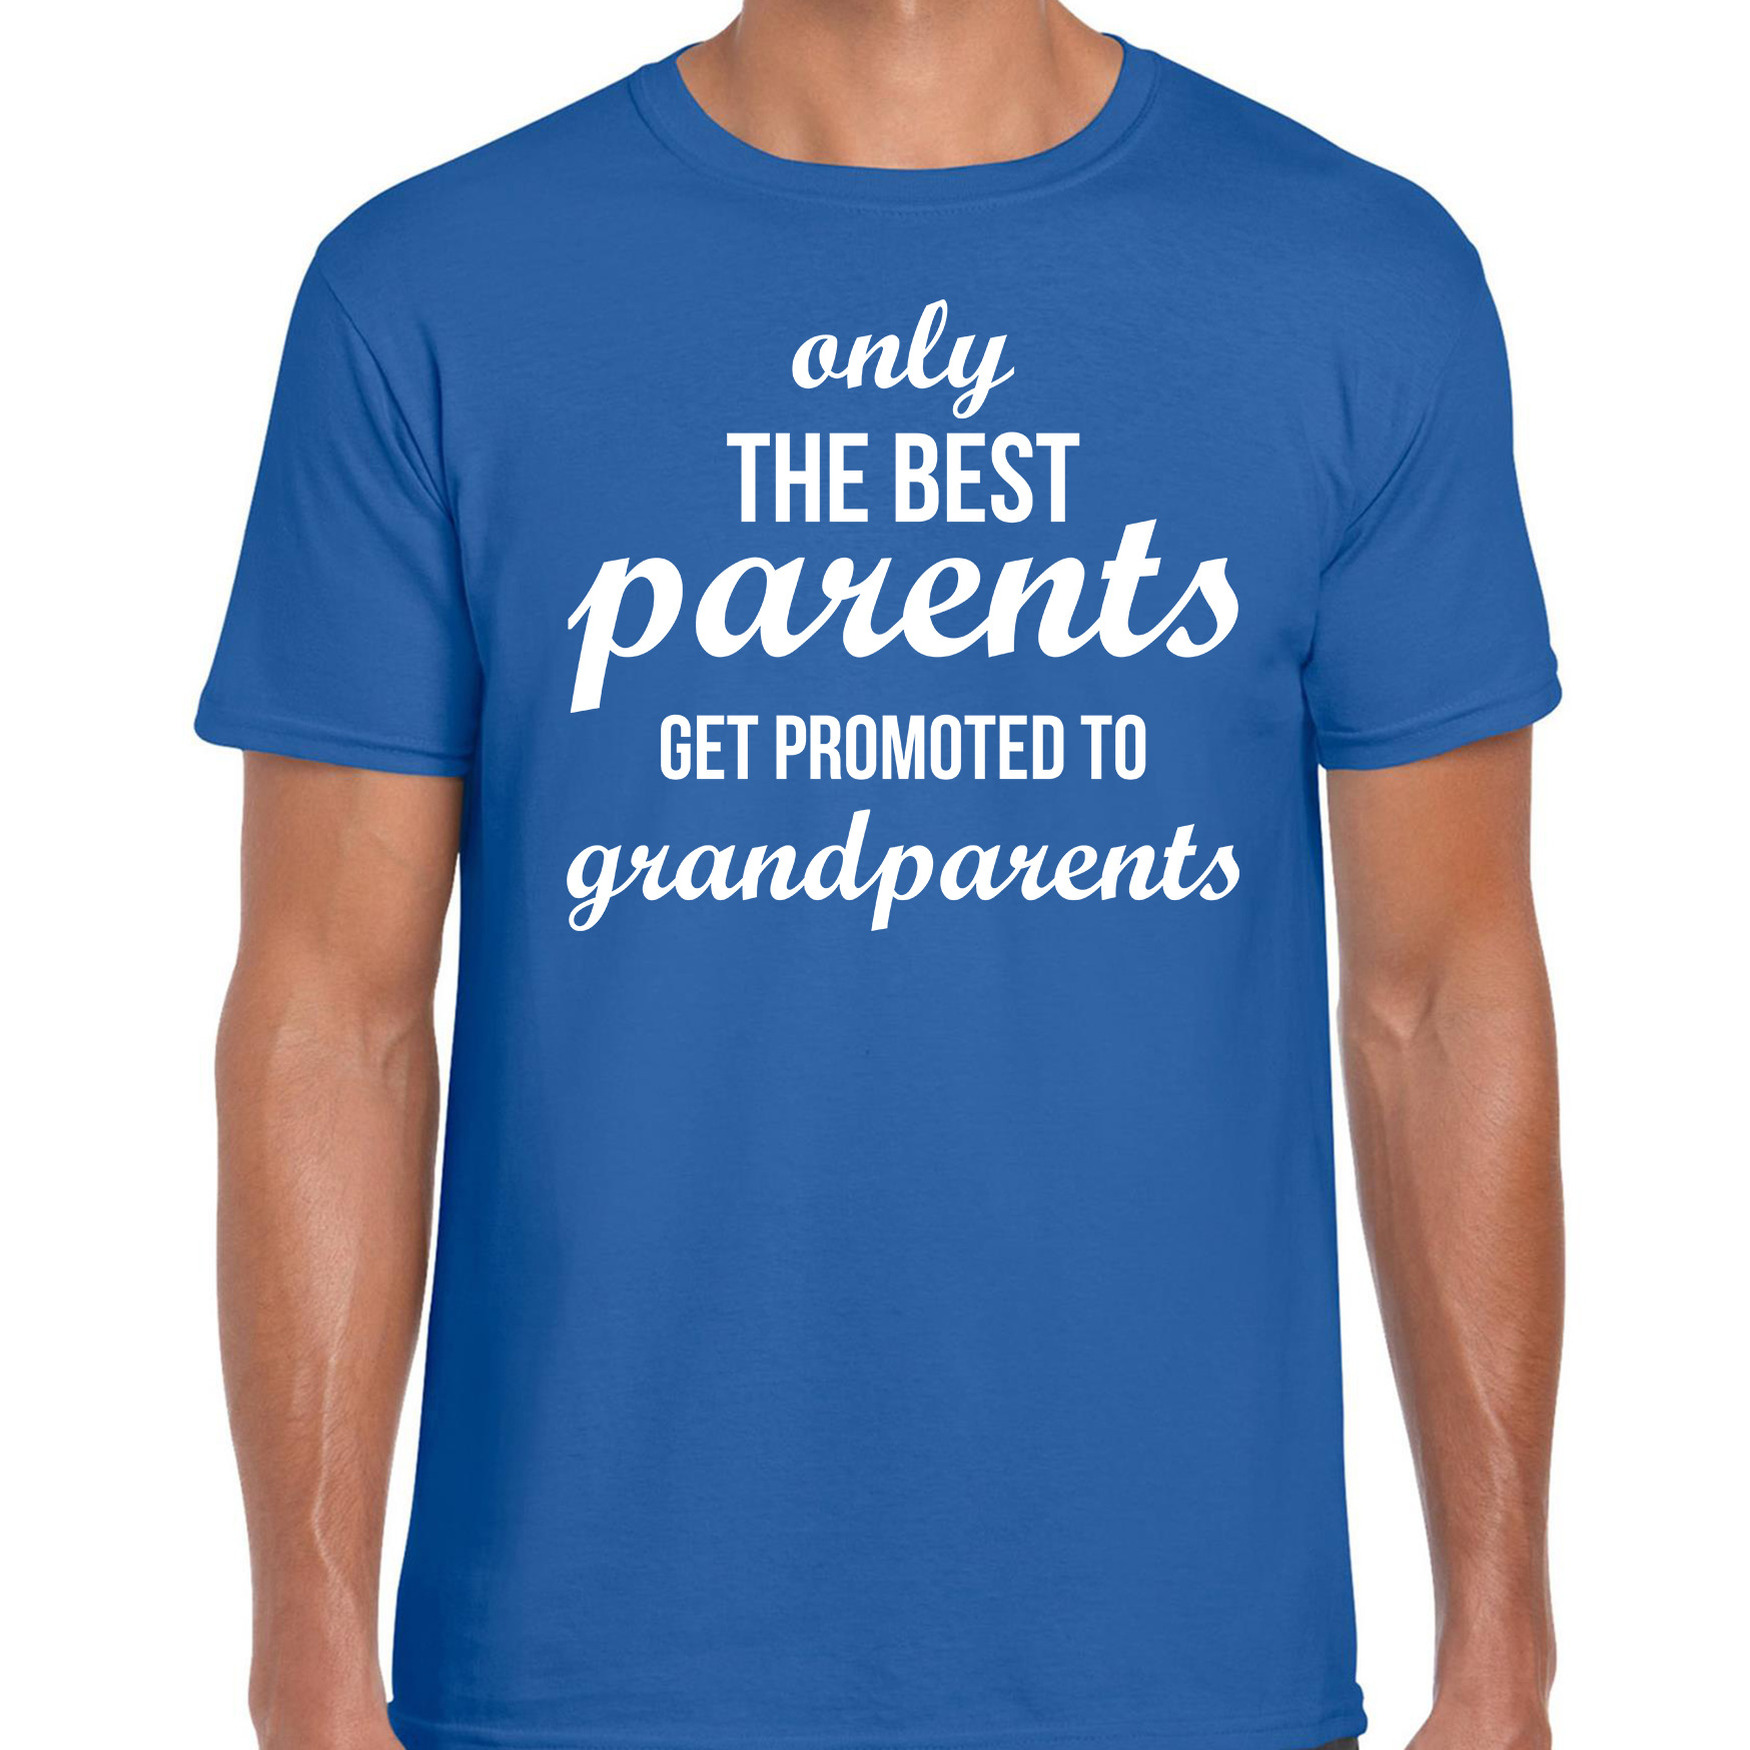 Only the best parents get promoted to grandparents t-shirt blauw voor heren